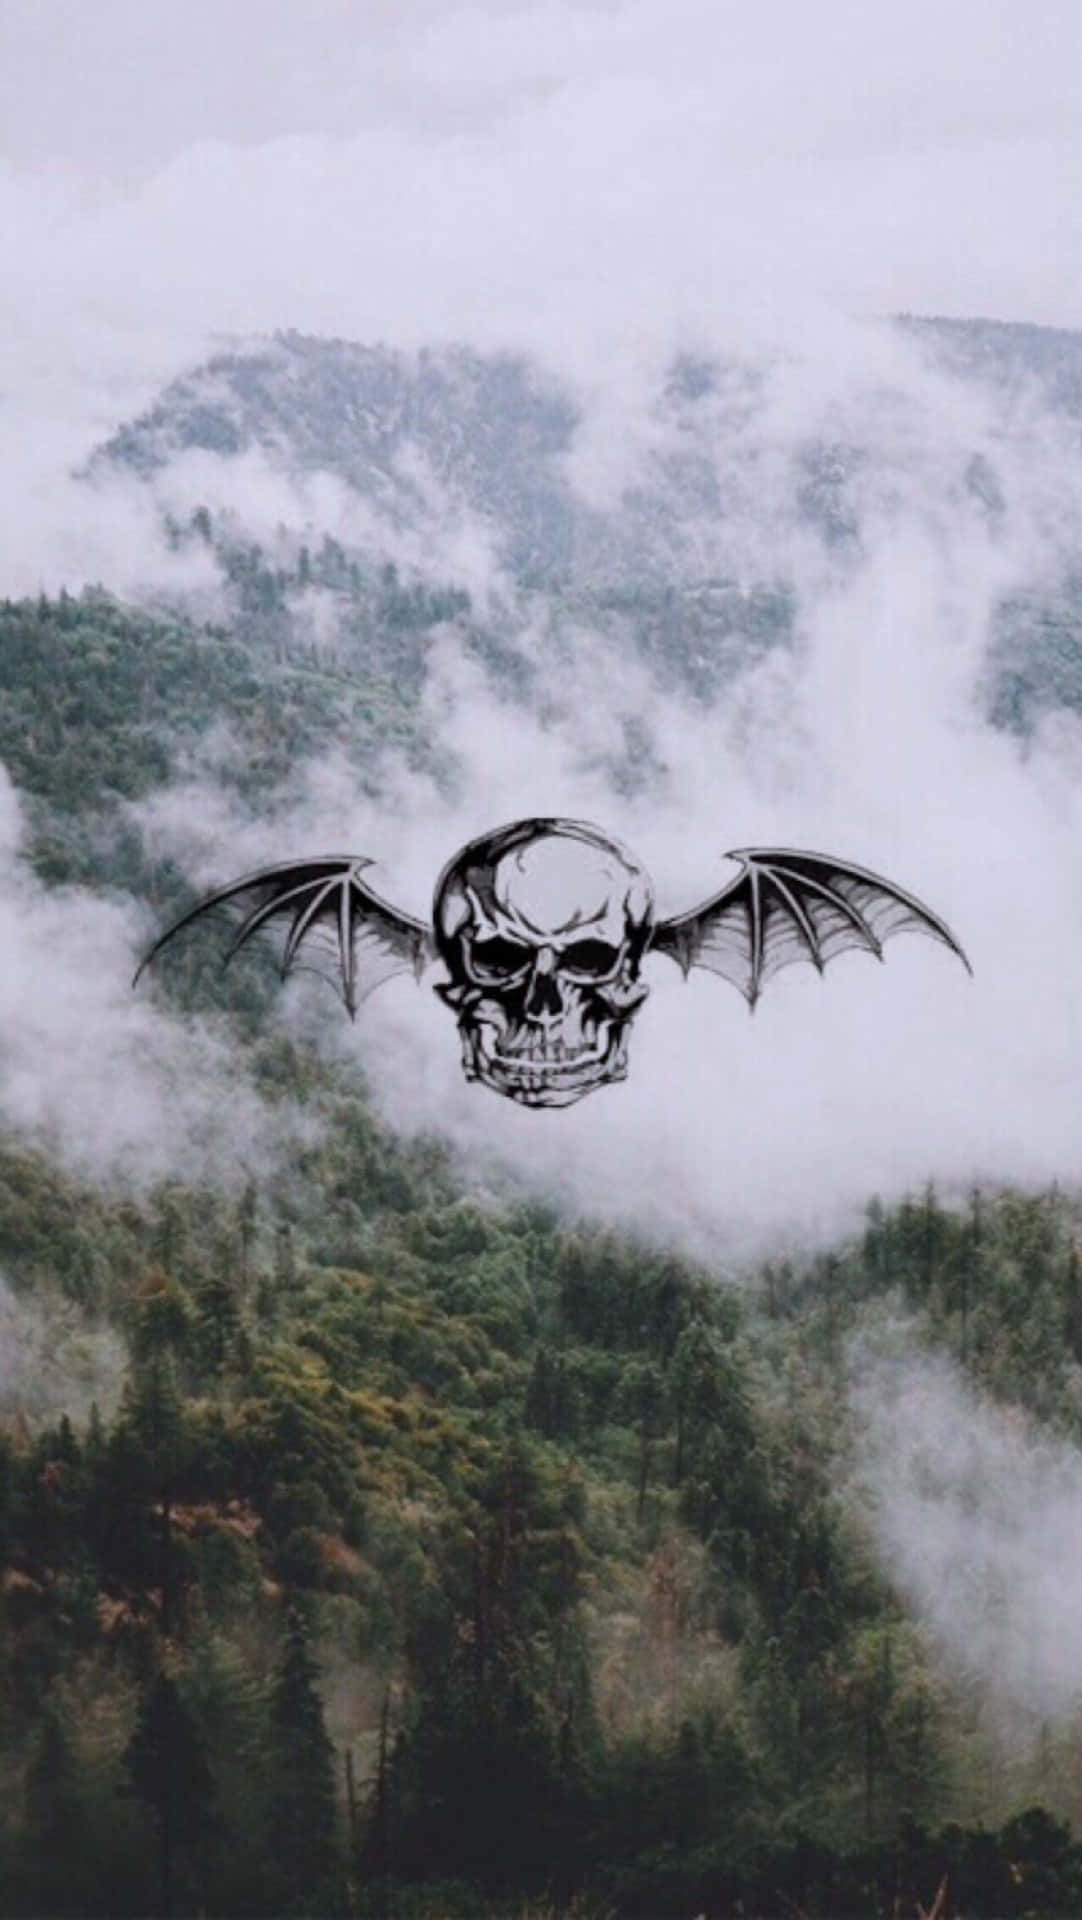 Show Your Passion For Avenged Sevenfold With This Eye-Catching iPhone Wallpaper